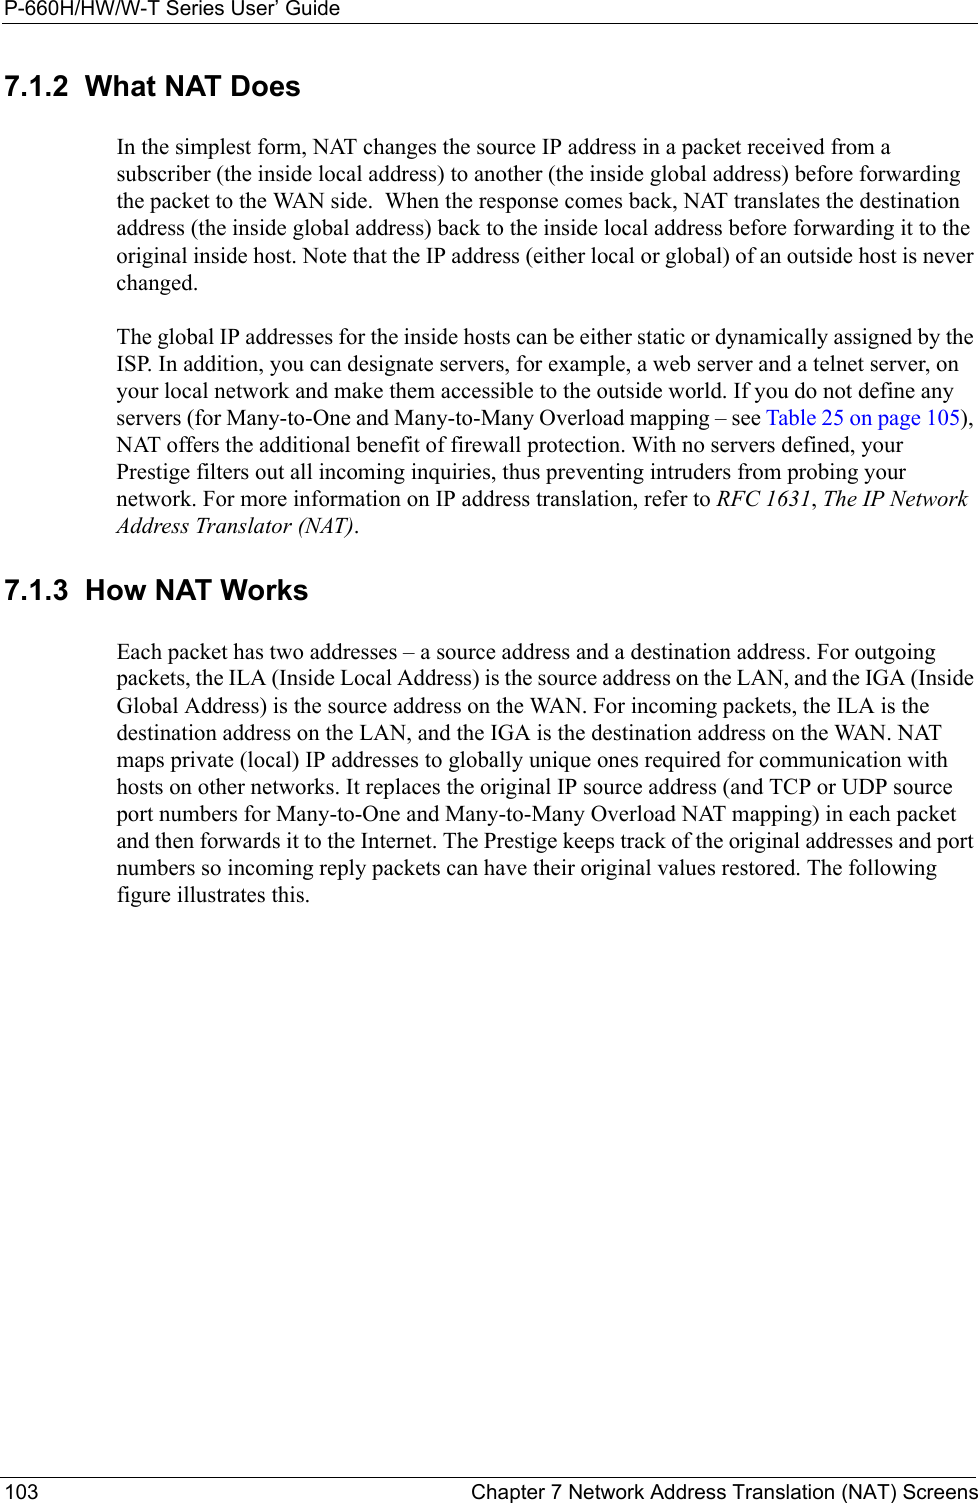 P-660H/HW/W-T Series User’ Guide103 Chapter 7 Network Address Translation (NAT) Screens7.1.2  What NAT DoesIn the simplest form, NAT changes the source IP address in a packet received from a subscriber (the inside local address) to another (the inside global address) before forwarding the packet to the WAN side.  When the response comes back, NAT translates the destination address (the inside global address) back to the inside local address before forwarding it to the original inside host. Note that the IP address (either local or global) of an outside host is never changed.The global IP addresses for the inside hosts can be either static or dynamically assigned by the ISP. In addition, you can designate servers, for example, a web server and a telnet server, on your local network and make them accessible to the outside world. If you do not define any servers (for Many-to-One and Many-to-Many Overload mapping – see Table 25 on page 105), NAT offers the additional benefit of firewall protection. With no servers defined, your Prestige filters out all incoming inquiries, thus preventing intruders from probing your network. For more information on IP address translation, refer to RFC 1631, The IP Network Address Translator (NAT).7.1.3  How NAT WorksEach packet has two addresses – a source address and a destination address. For outgoing packets, the ILA (Inside Local Address) is the source address on the LAN, and the IGA (Inside Global Address) is the source address on the WAN. For incoming packets, the ILA is the destination address on the LAN, and the IGA is the destination address on the WAN. NAT maps private (local) IP addresses to globally unique ones required for communication with hosts on other networks. It replaces the original IP source address (and TCP or UDP source port numbers for Many-to-One and Many-to-Many Overload NAT mapping) in each packet and then forwards it to the Internet. The Prestige keeps track of the original addresses and port numbers so incoming reply packets can have their original values restored. The following figure illustrates this.